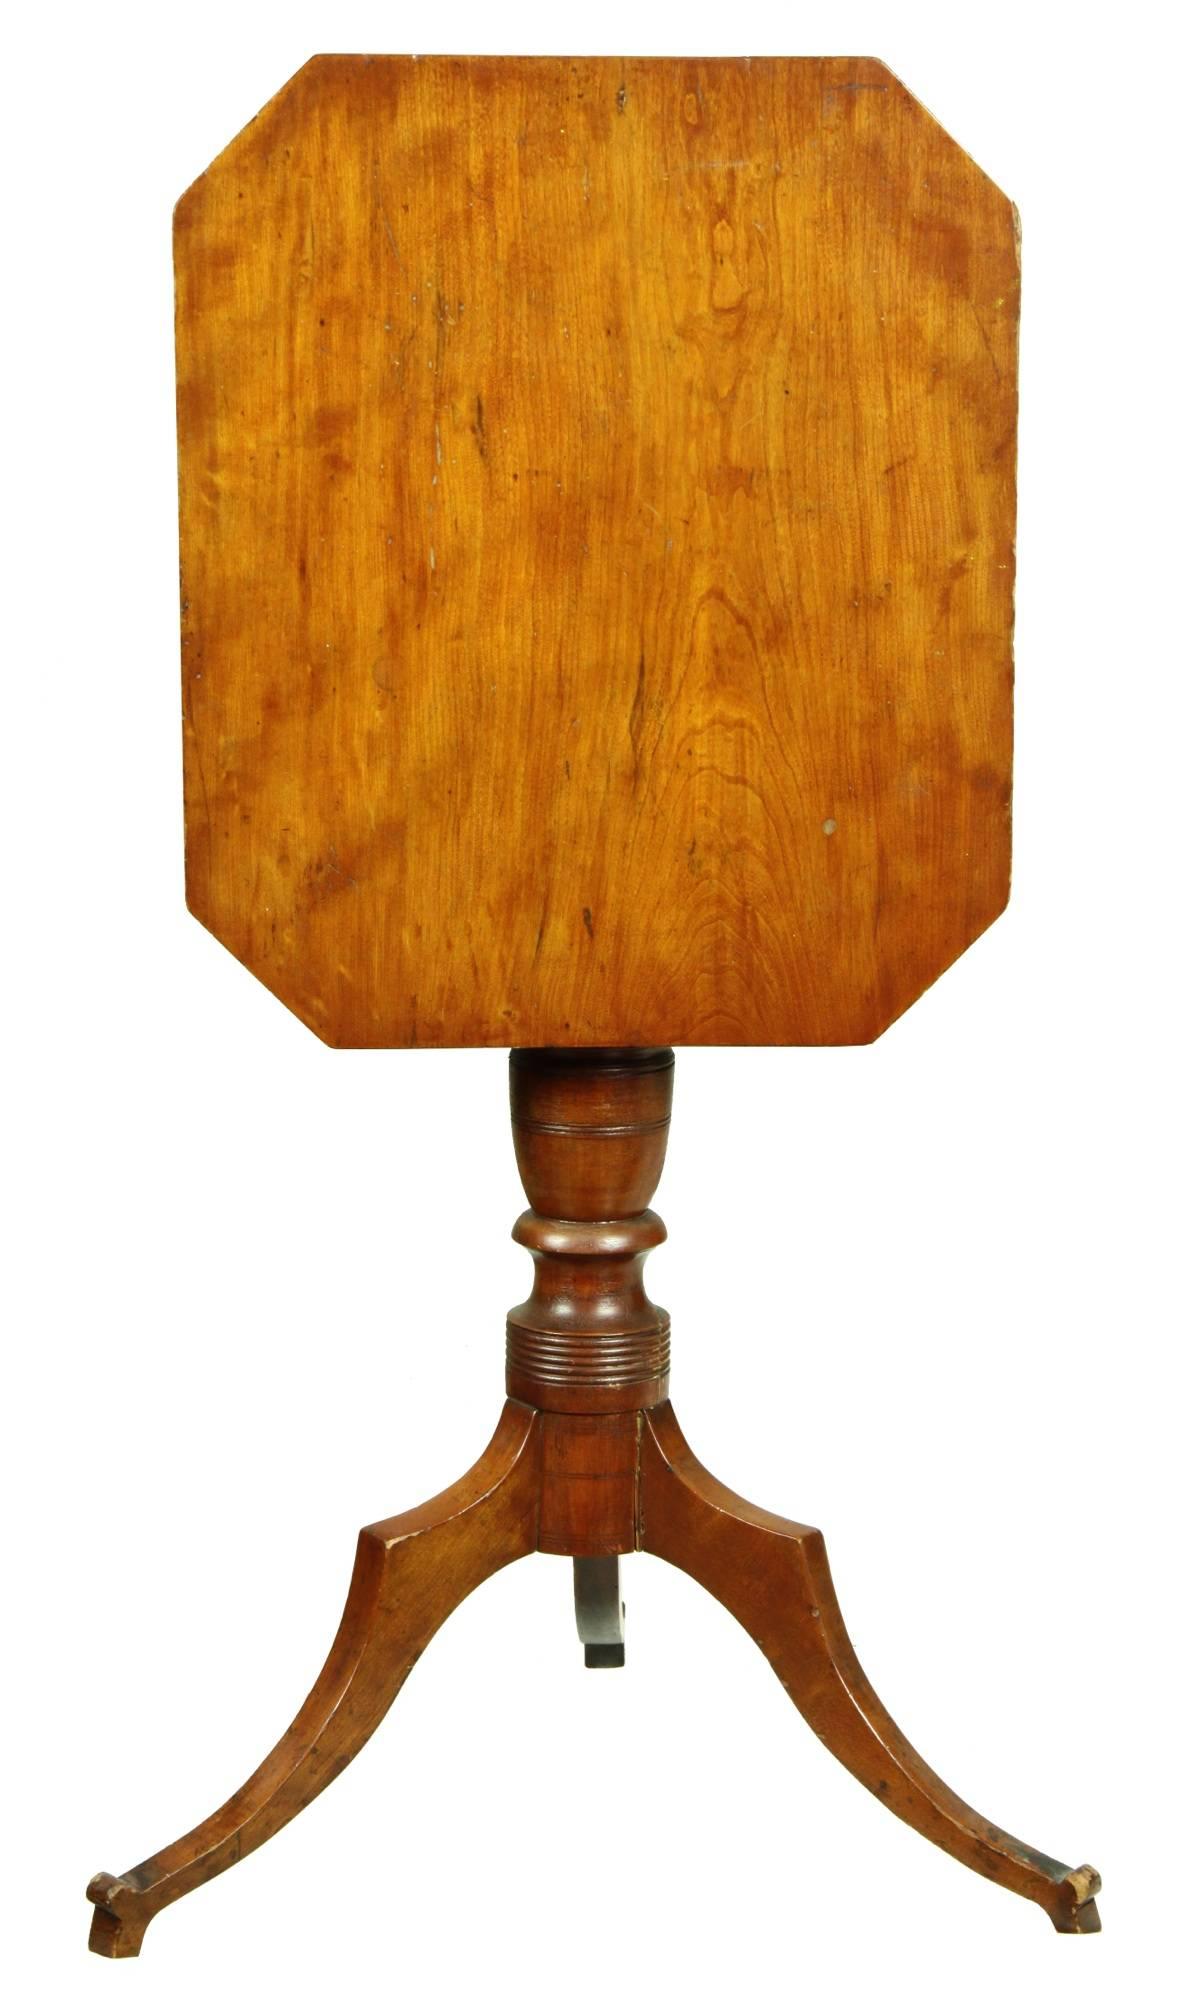 This table retains its original surface and descended in the Chute family of Winchester, MA. The legs have a form characteristic of Connecticut furniture as does the large turned urn. The top is chamfered underneath at the edge, a refined technique